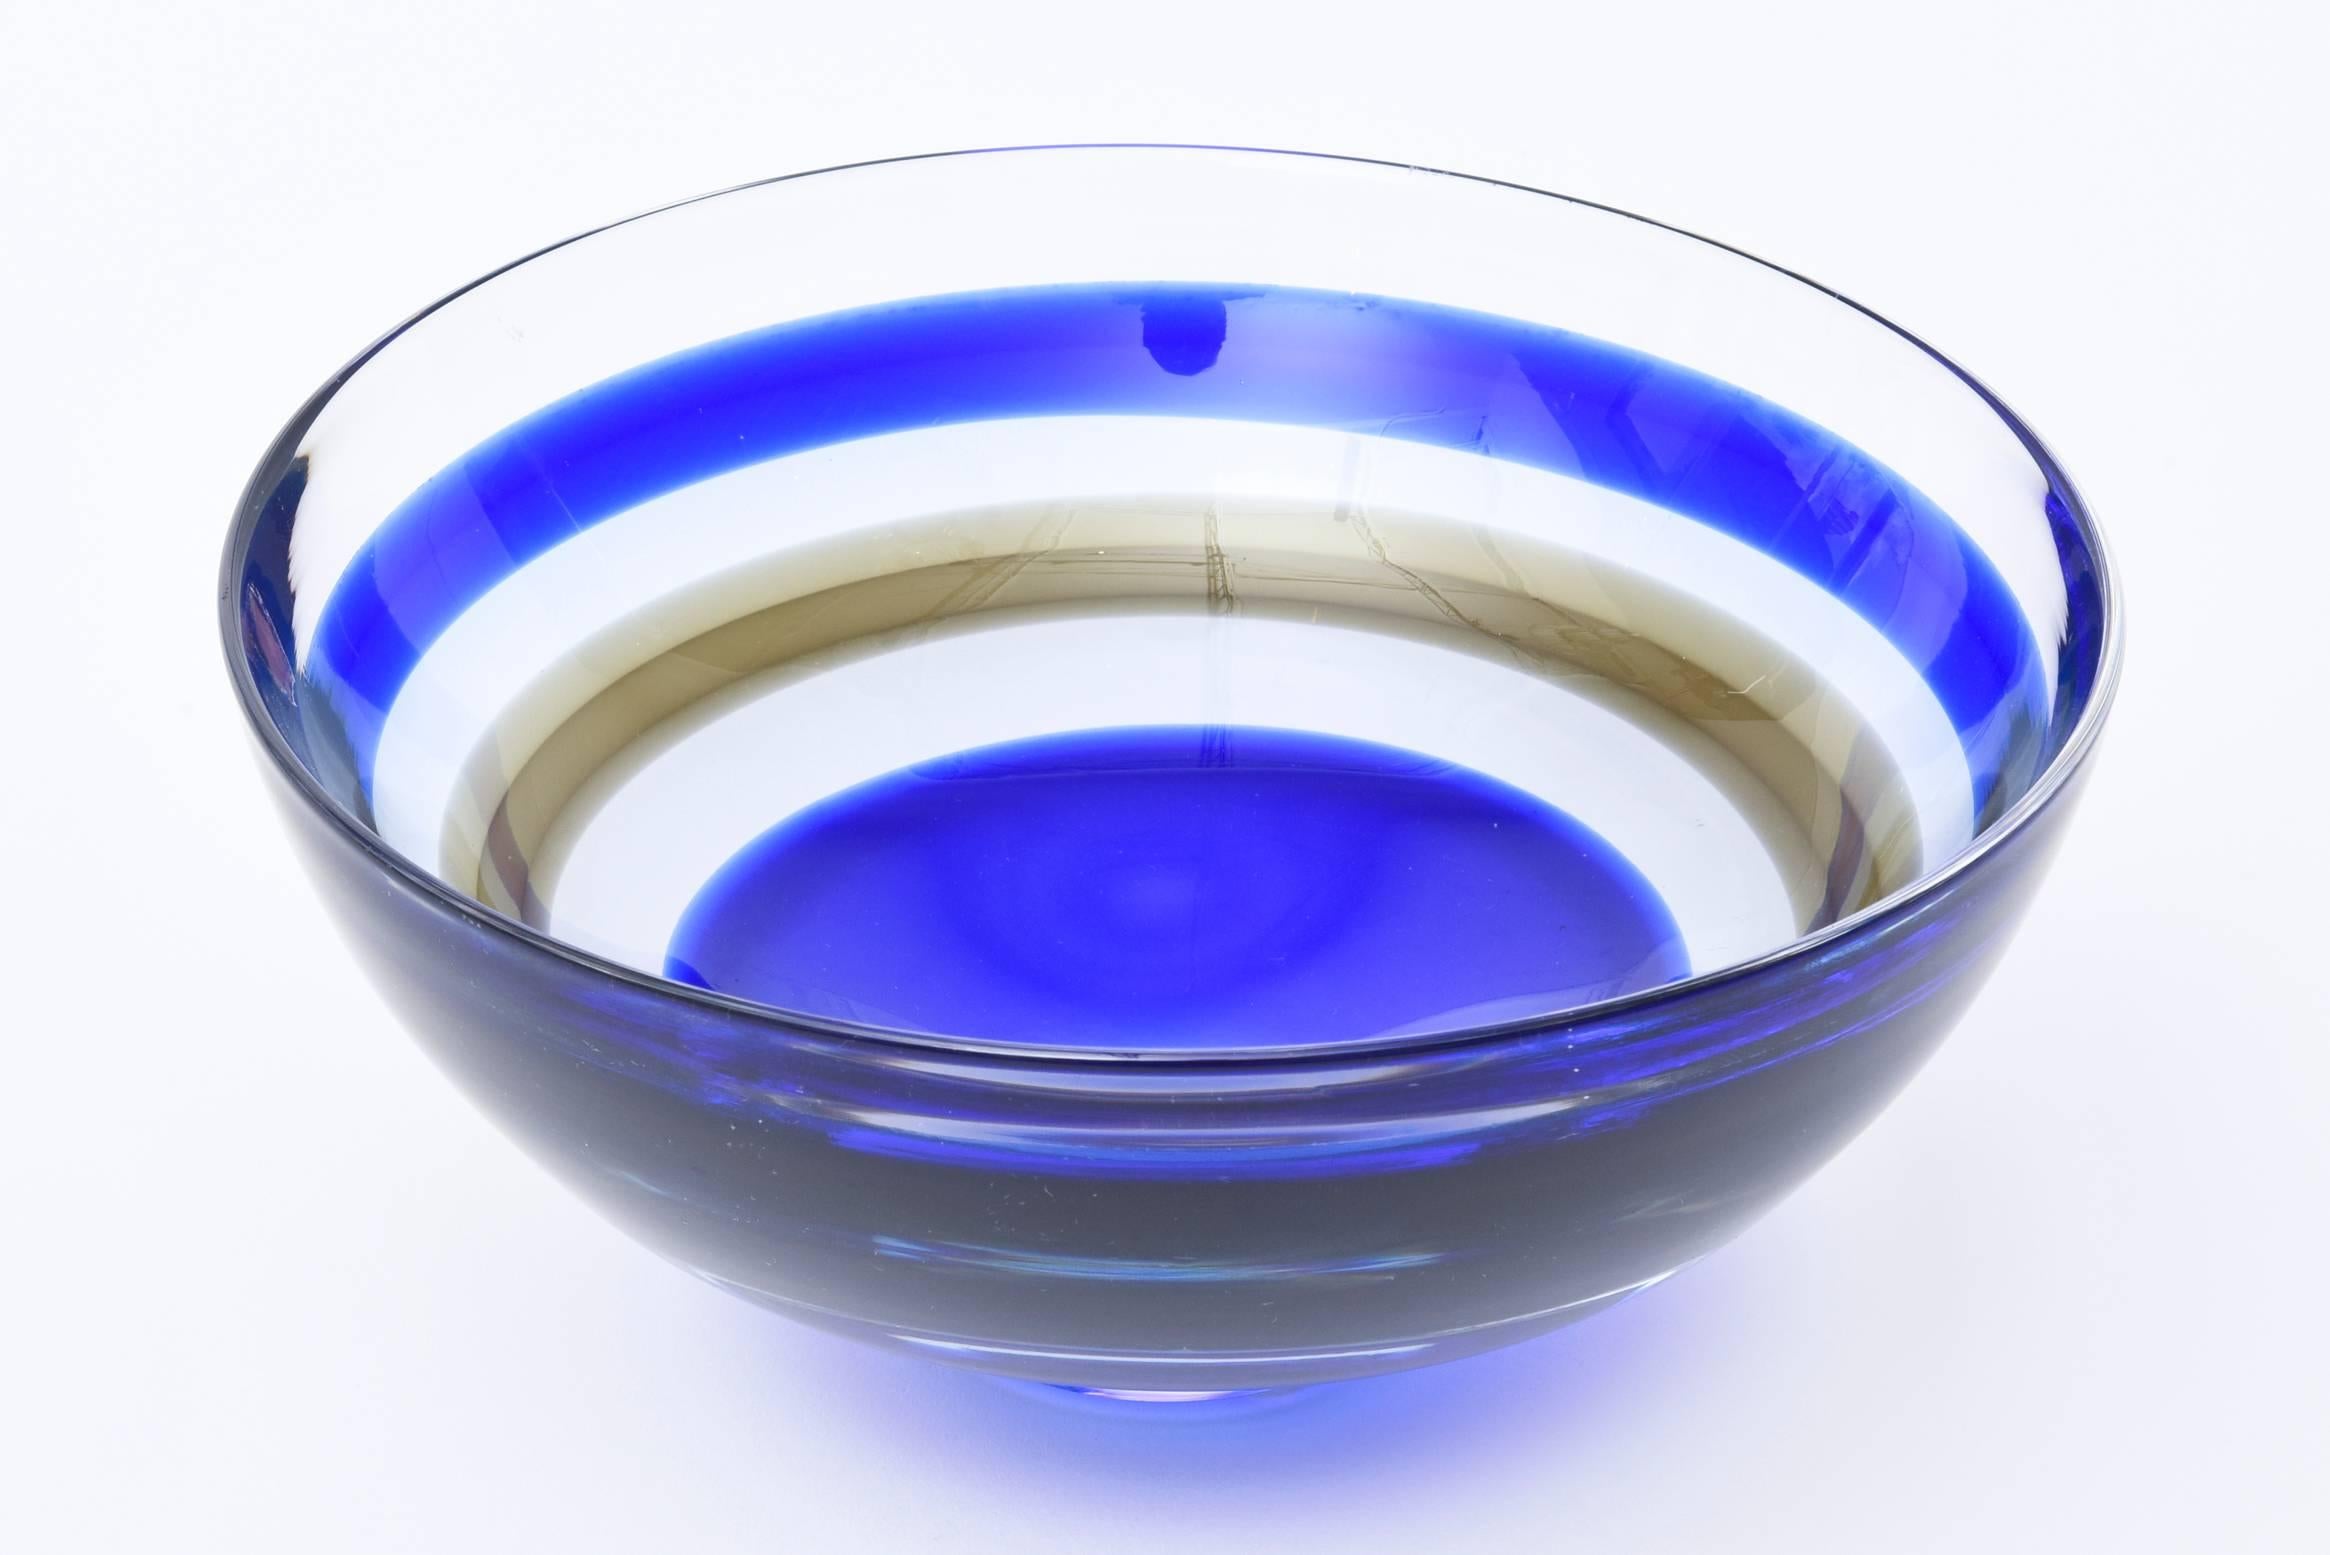 This stunning and vibrant cobalt blue and sage brown striped banded glass Swedish Orrefors vintage crystal glass bowl has the original sticker on it from the time of the 1960s. This is a beauty. There is one brown sage stripe admidst the cobalt